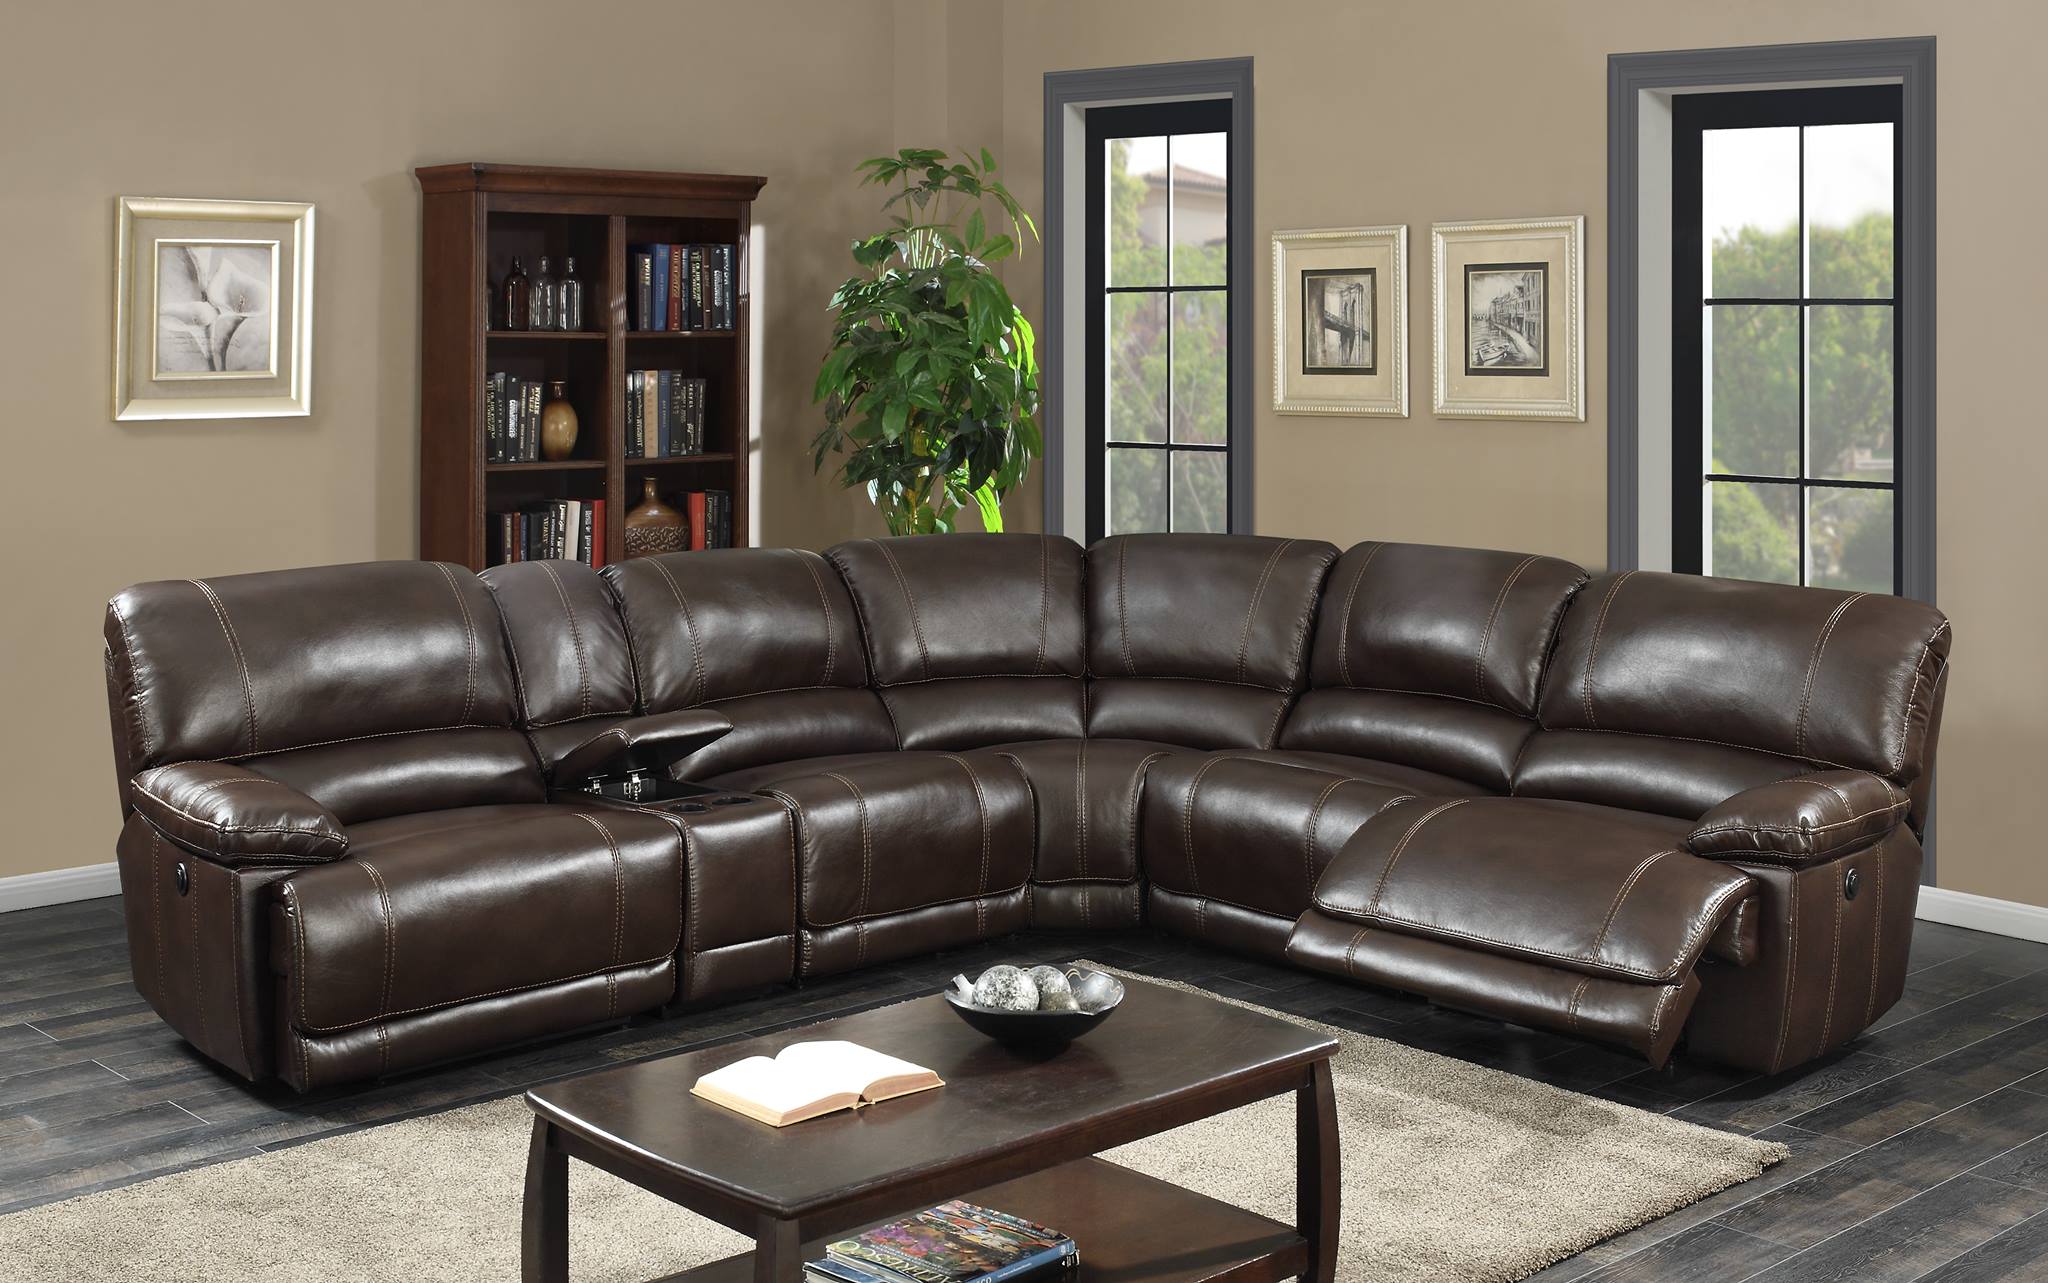 Venice Leather Gel Reclining Sectional, Florida Leather Furniture